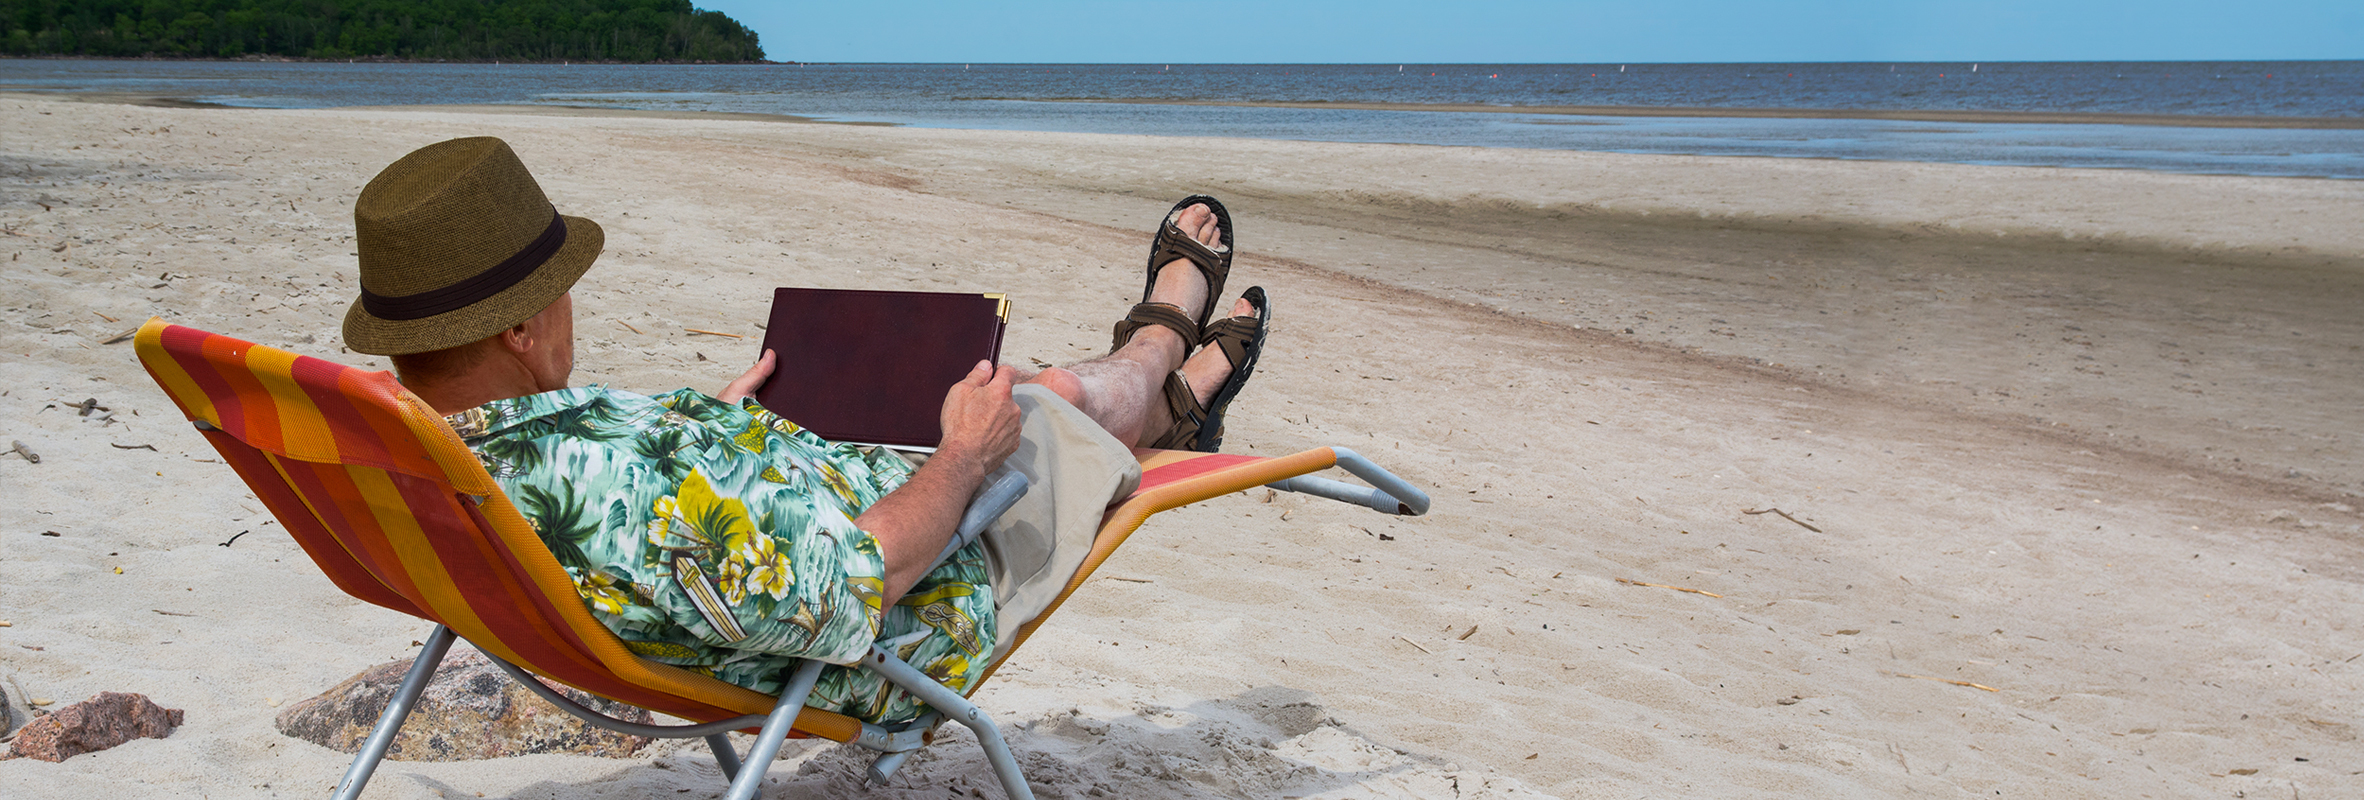 A retired man sitting on a chair on a sandy beach, holding a book and enjoying the sun.